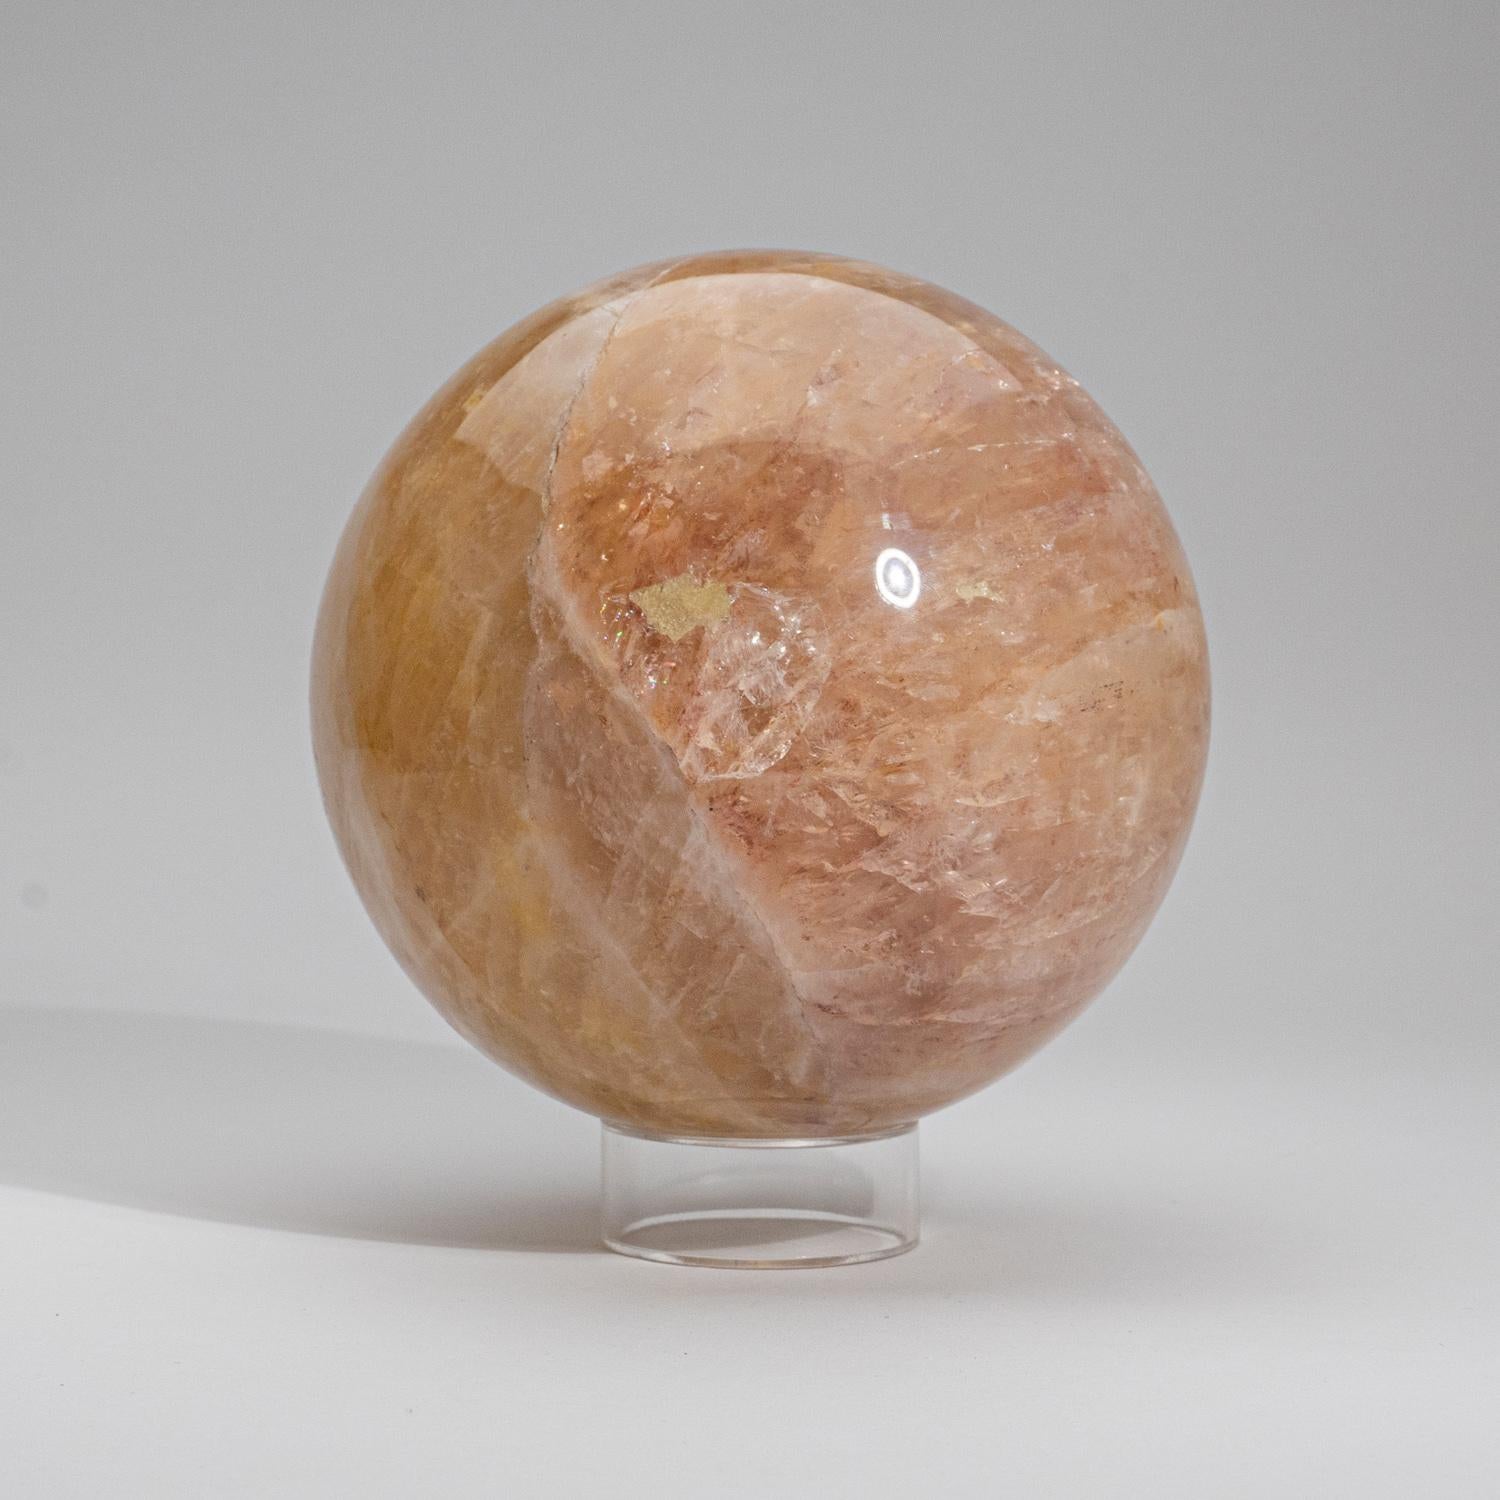 Top AAA-quality, hand polished sphere of natural gem translucent yellow Rose Quartz from Brazil. This piece is hand-polished to a brilliant shine. The yellow to golden-yellow color of transparent Citrine is due to traces of iron. The primary element